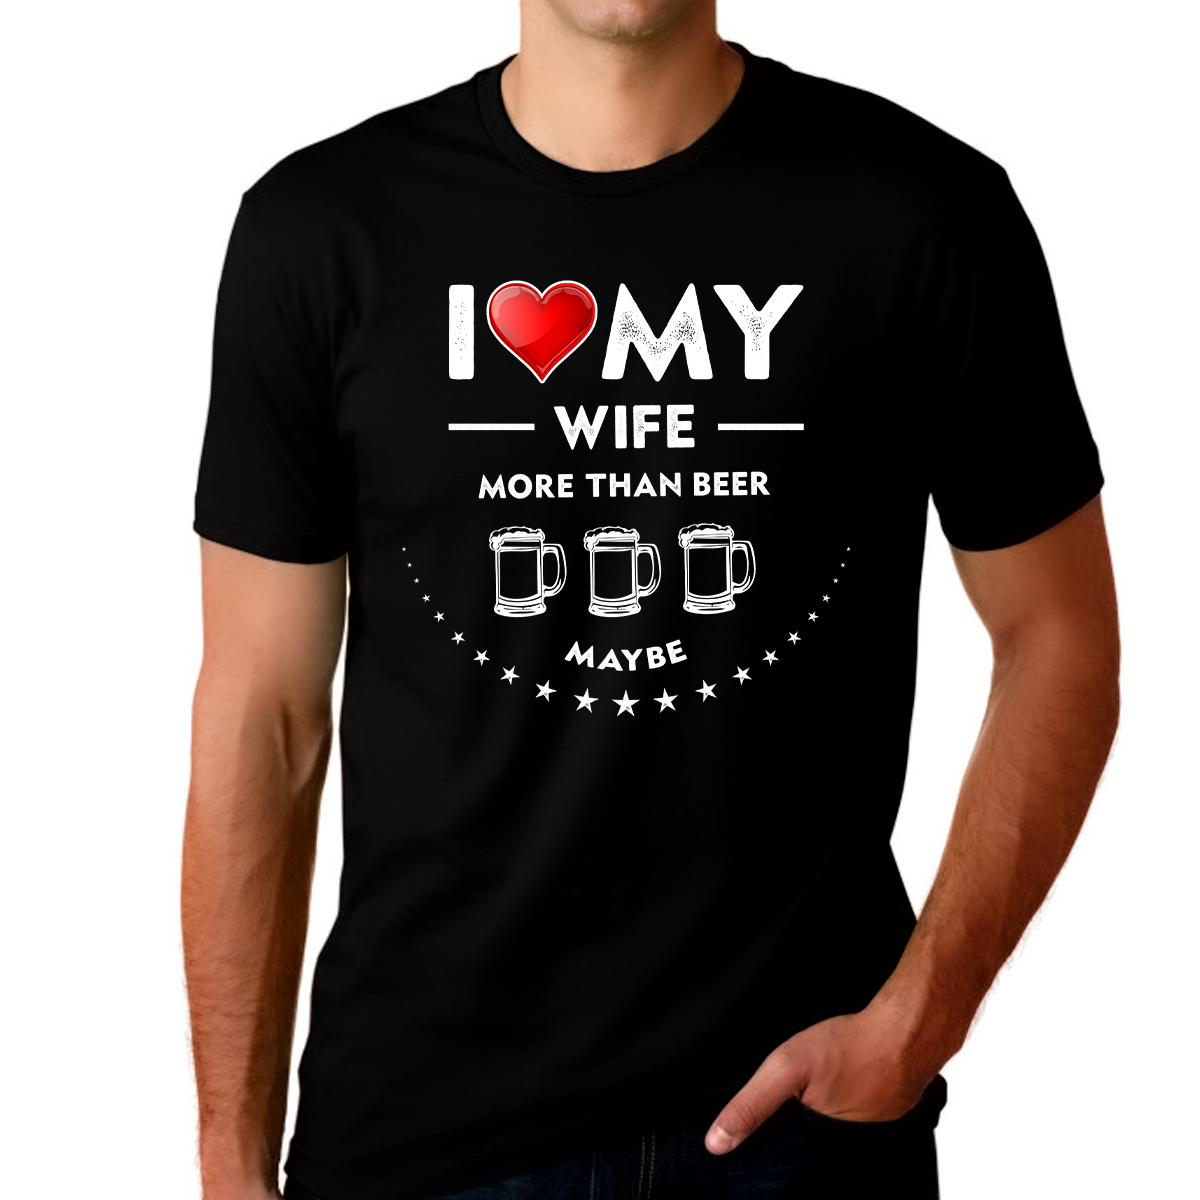 I Love My Wife Shirts for Men Cool Funny I Heart My Wife Love Beer Shirt Valentines Day Gifts for Him